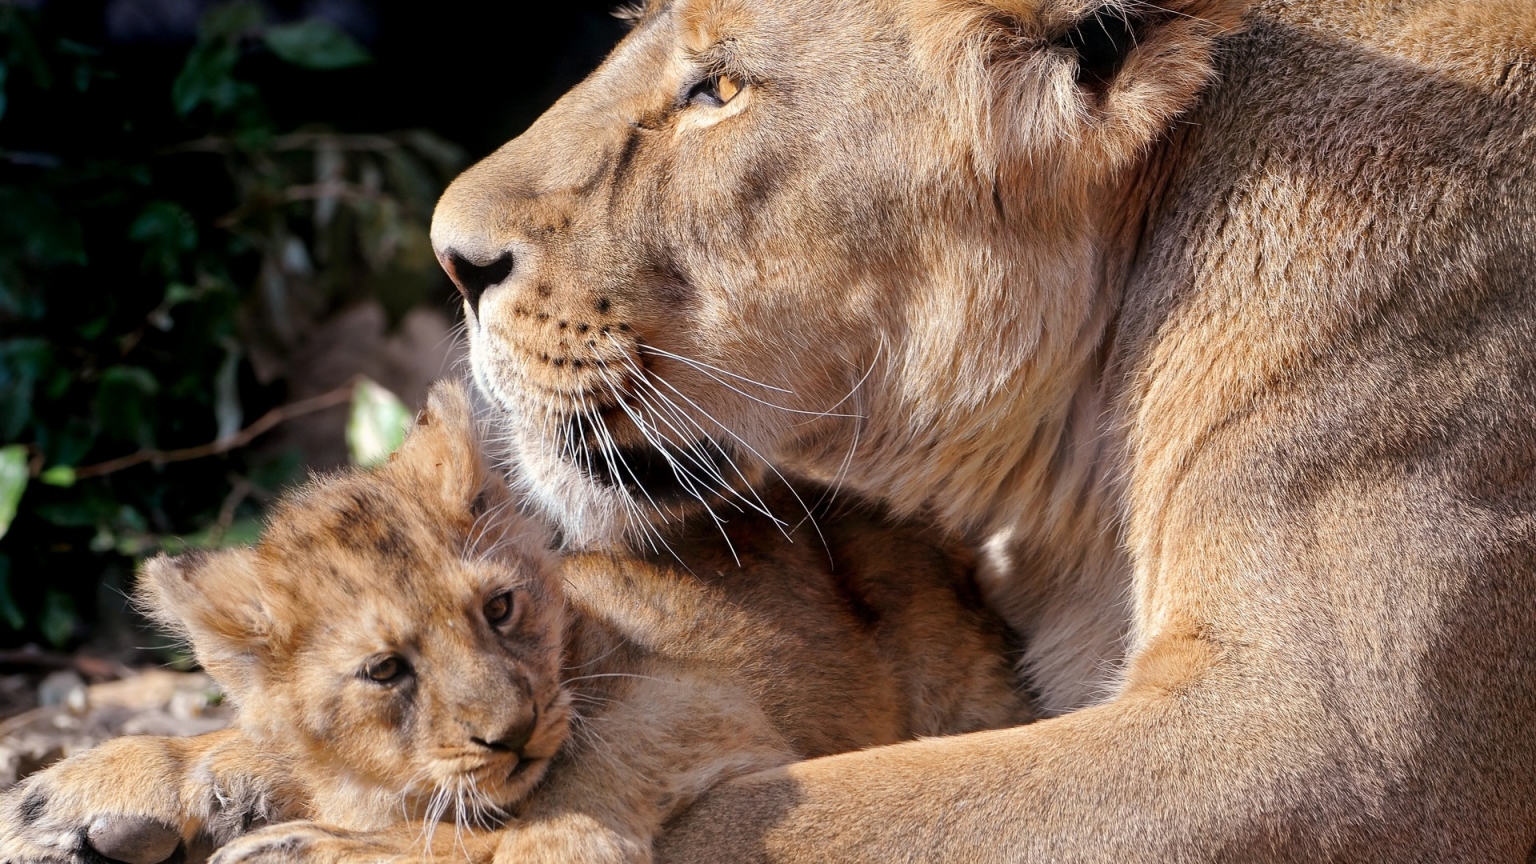 Lioness and her cub for 1536 x 864 HDTV resolution